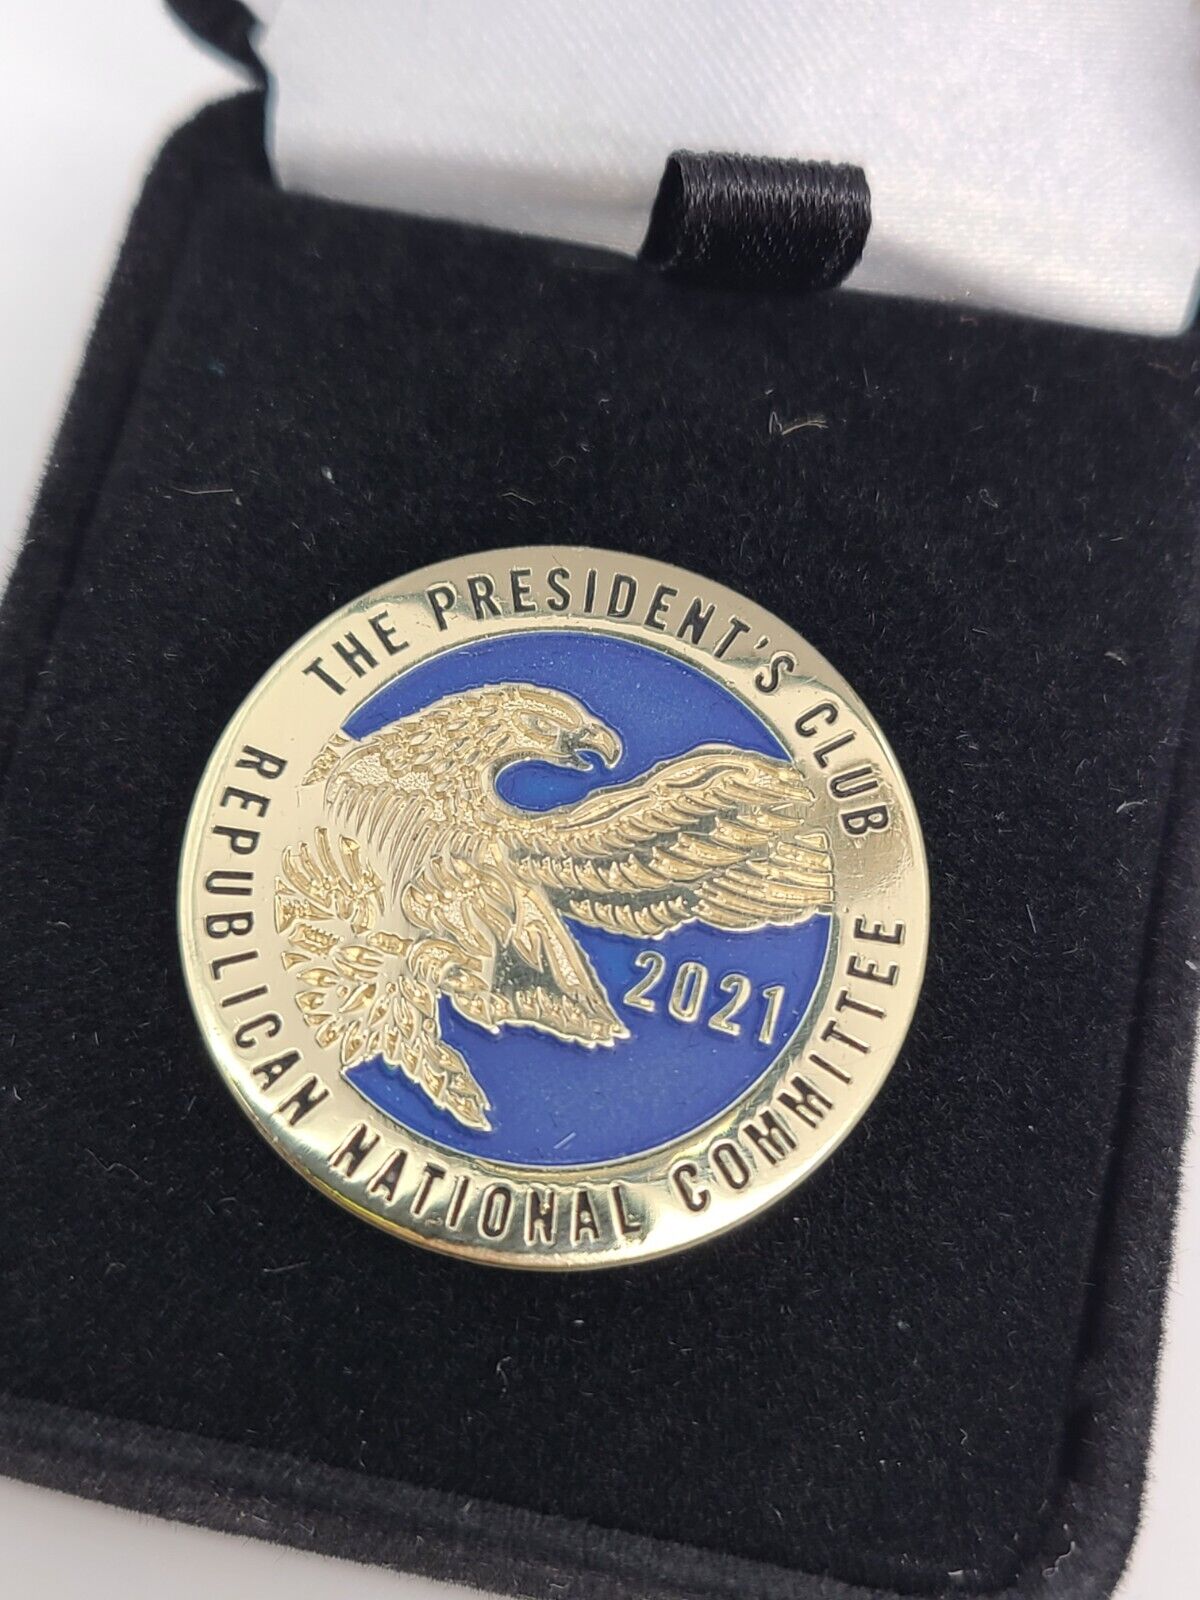 RNC Republican National Committee 2021 The President's Club Pin Lapel